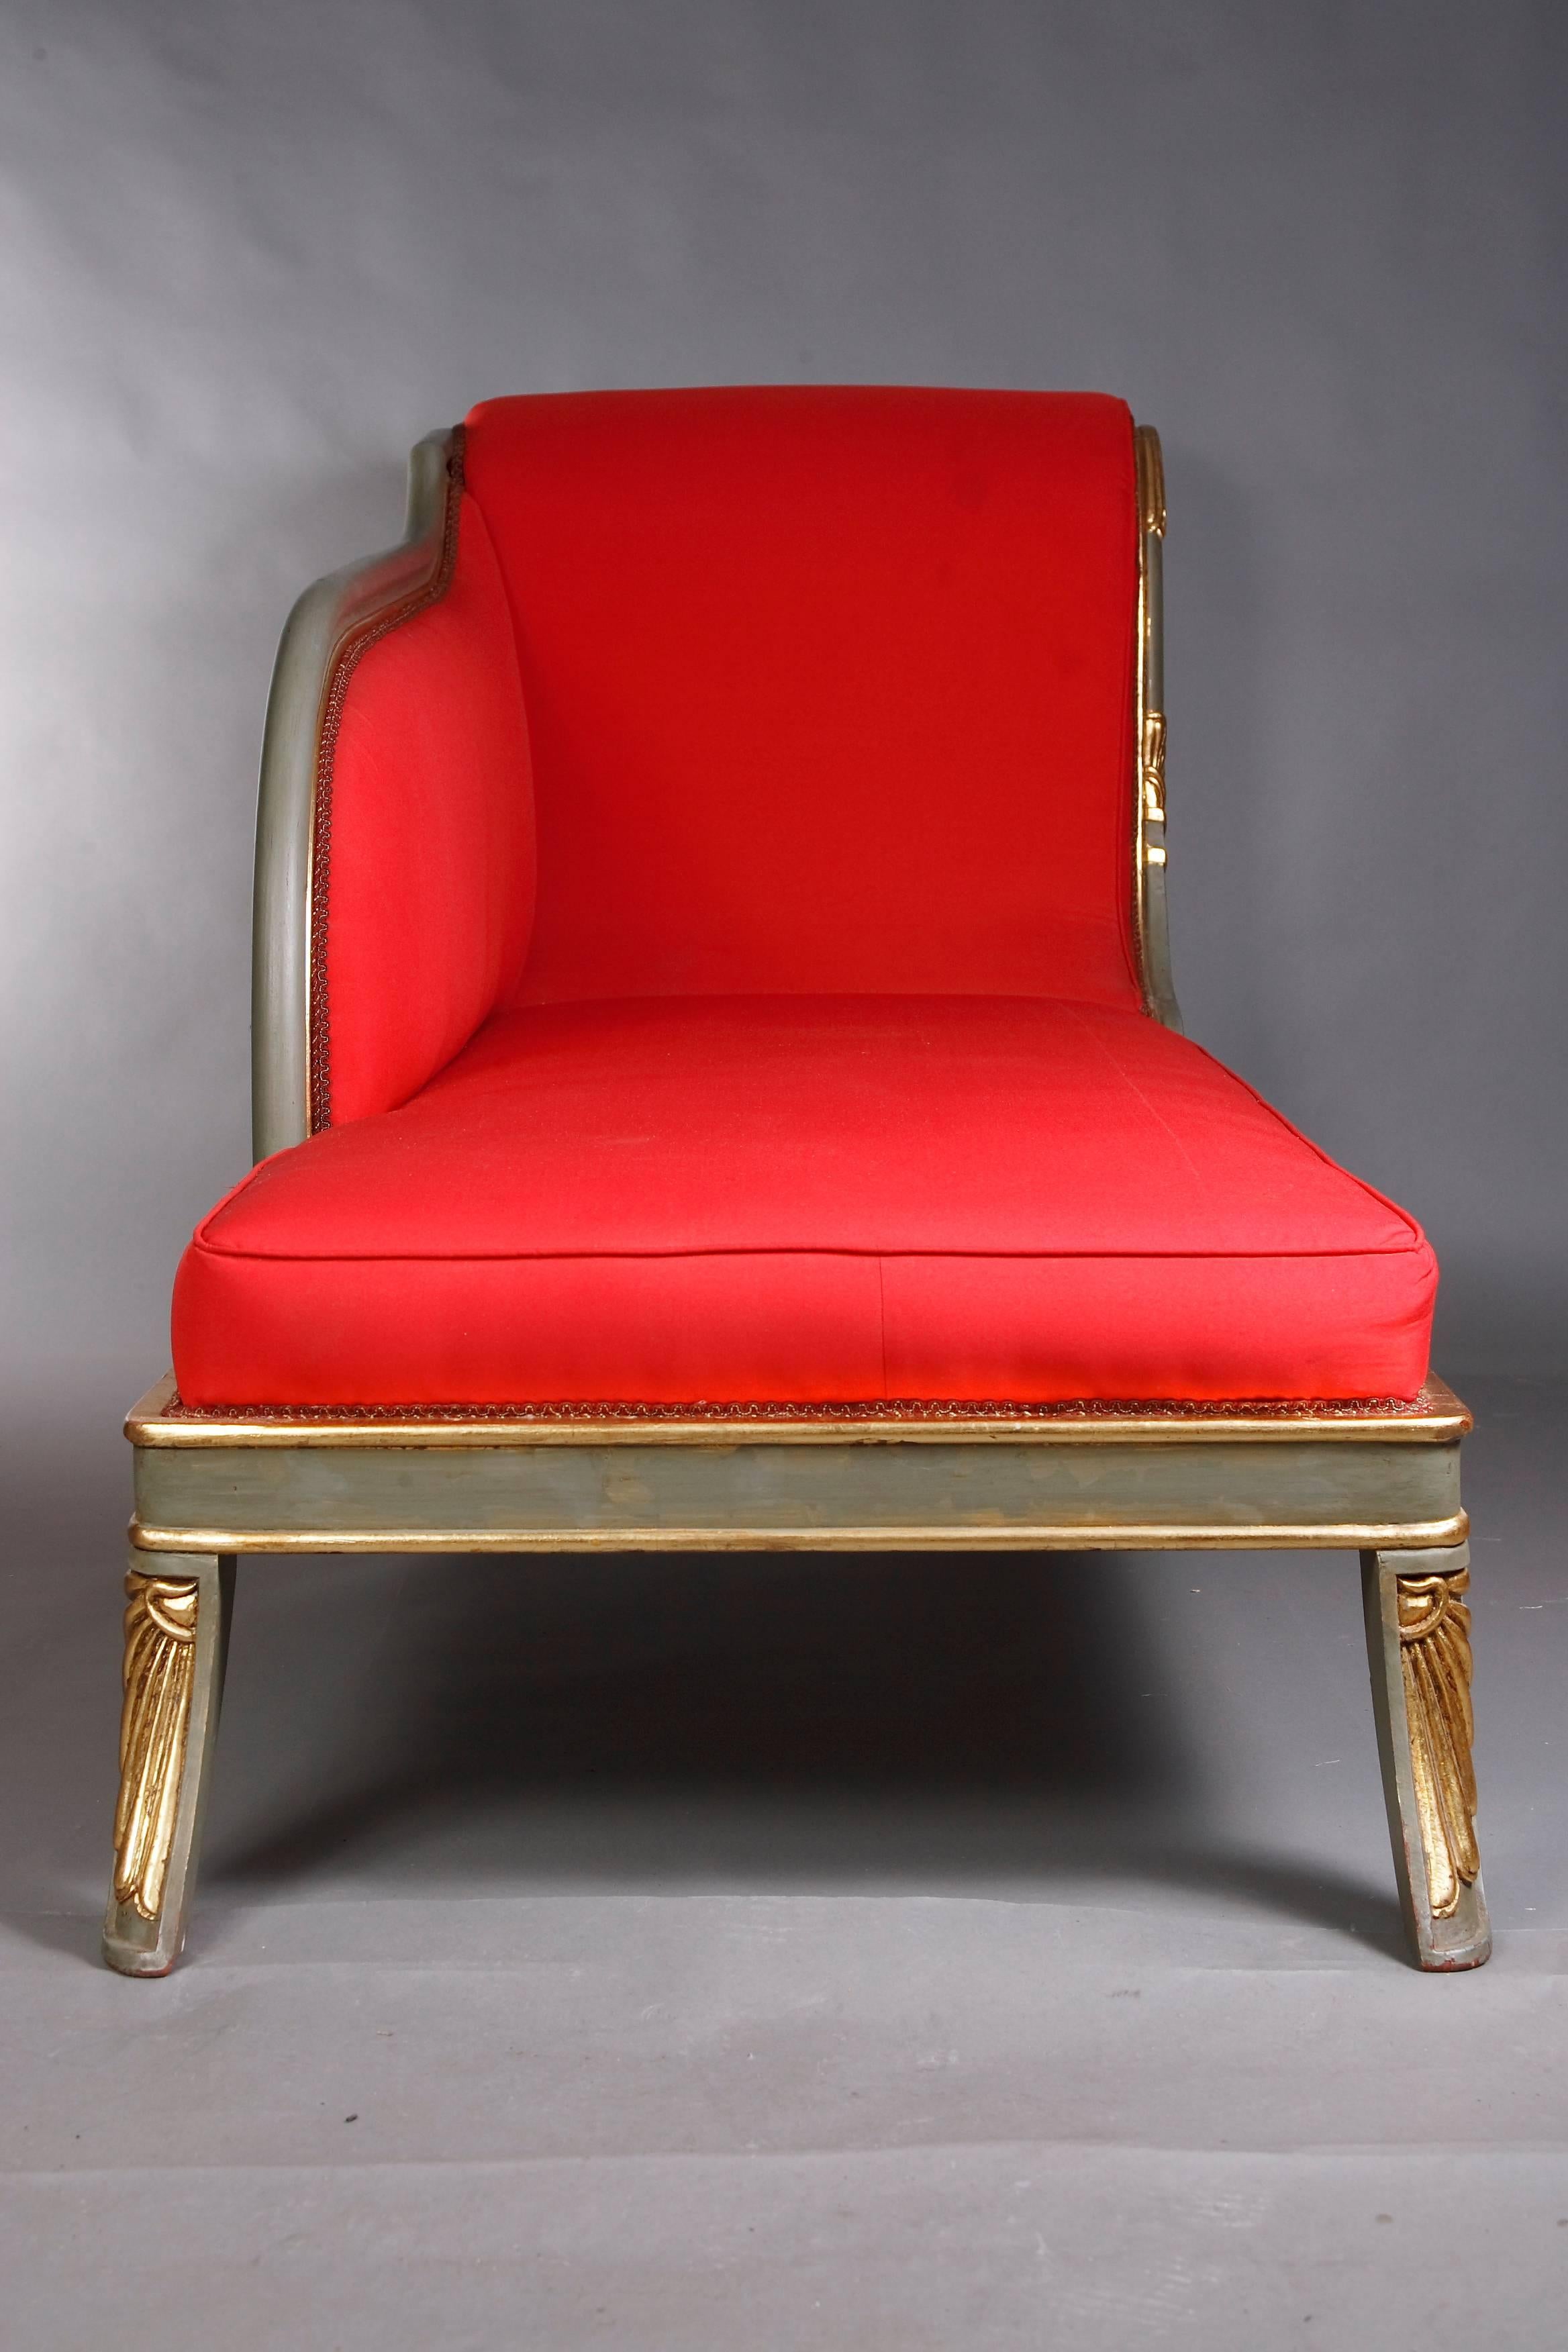 20th Century French Chaise Lounge in the Empire Style 1